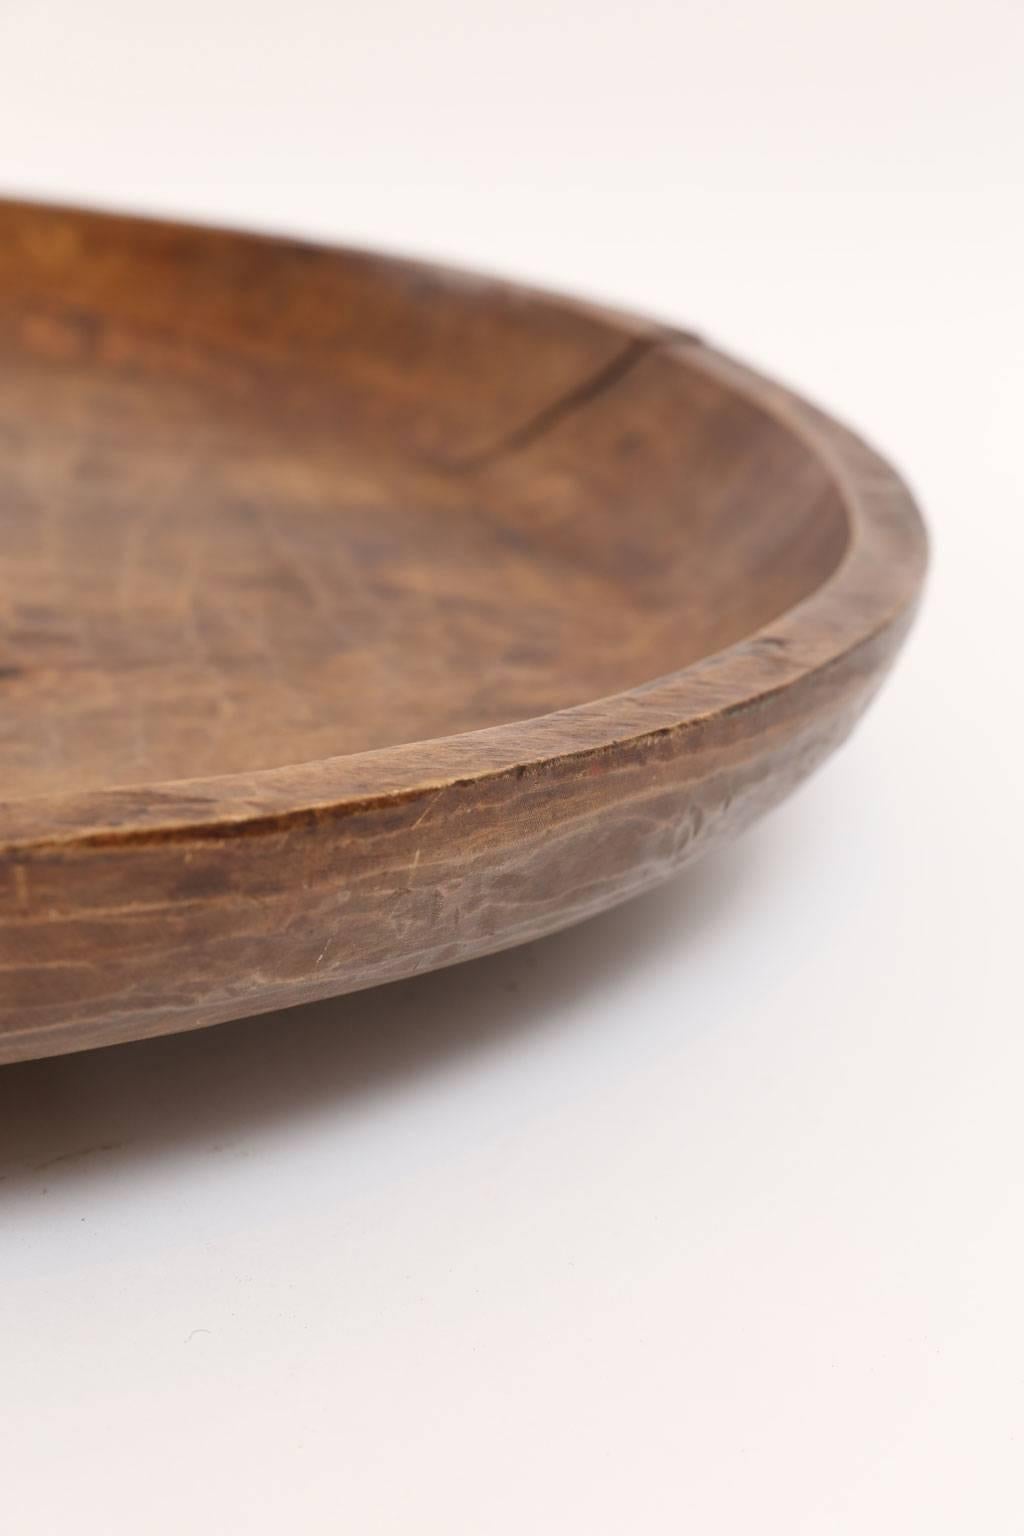 Hand-carved Lazy Susan from large 19th century primitive shallow wooden bowl mounted on a recent swivel base.